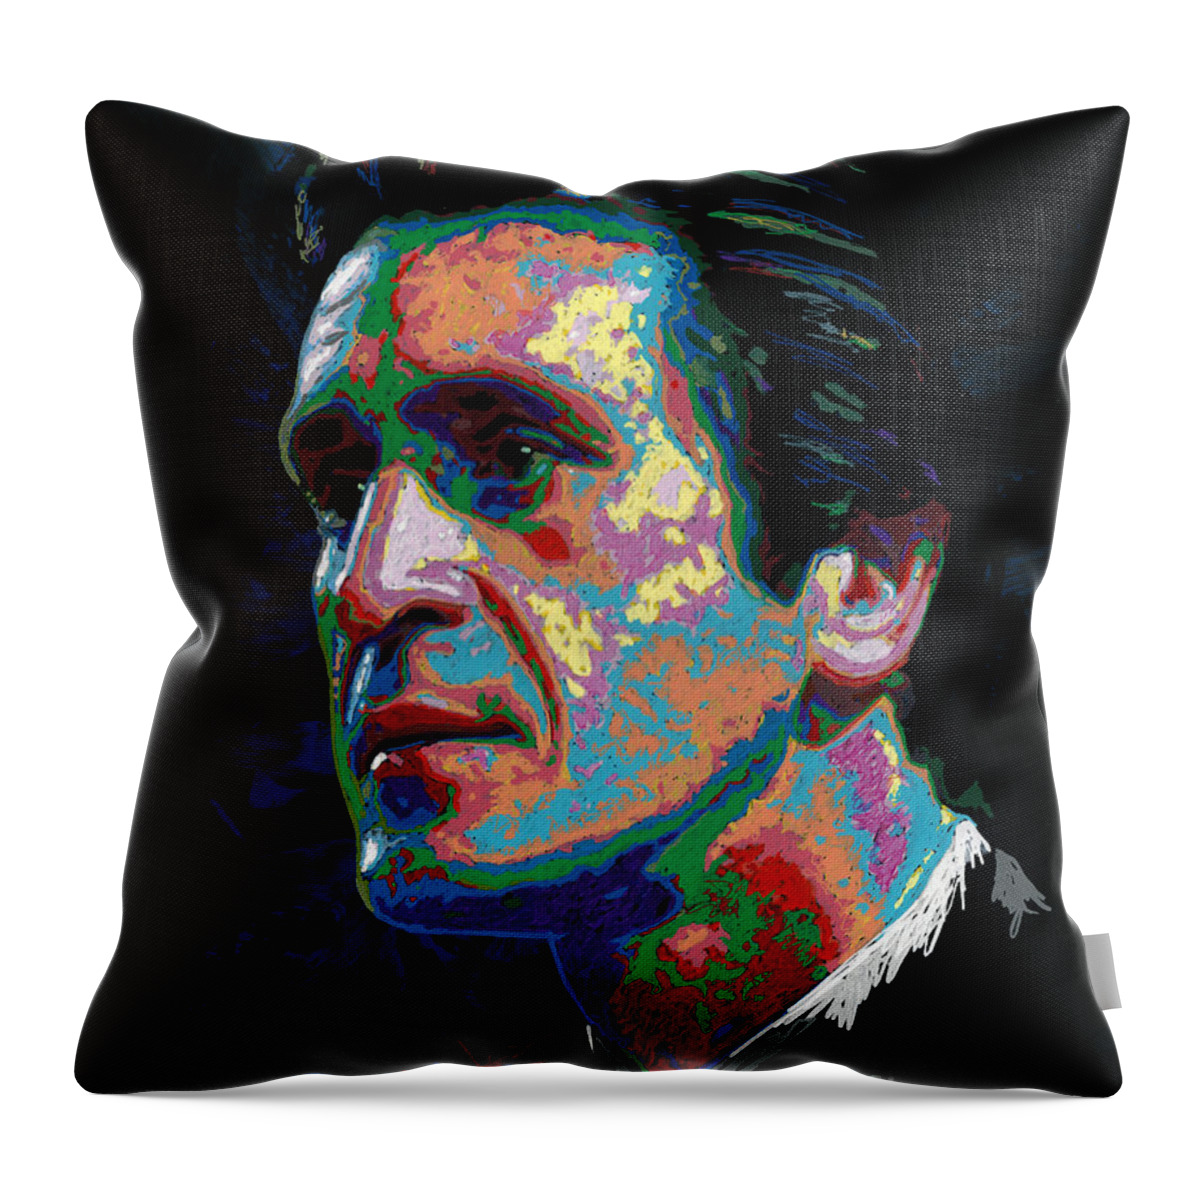 Pat Riley Throw Pillow featuring the painting Pat Riley by Maria Arango